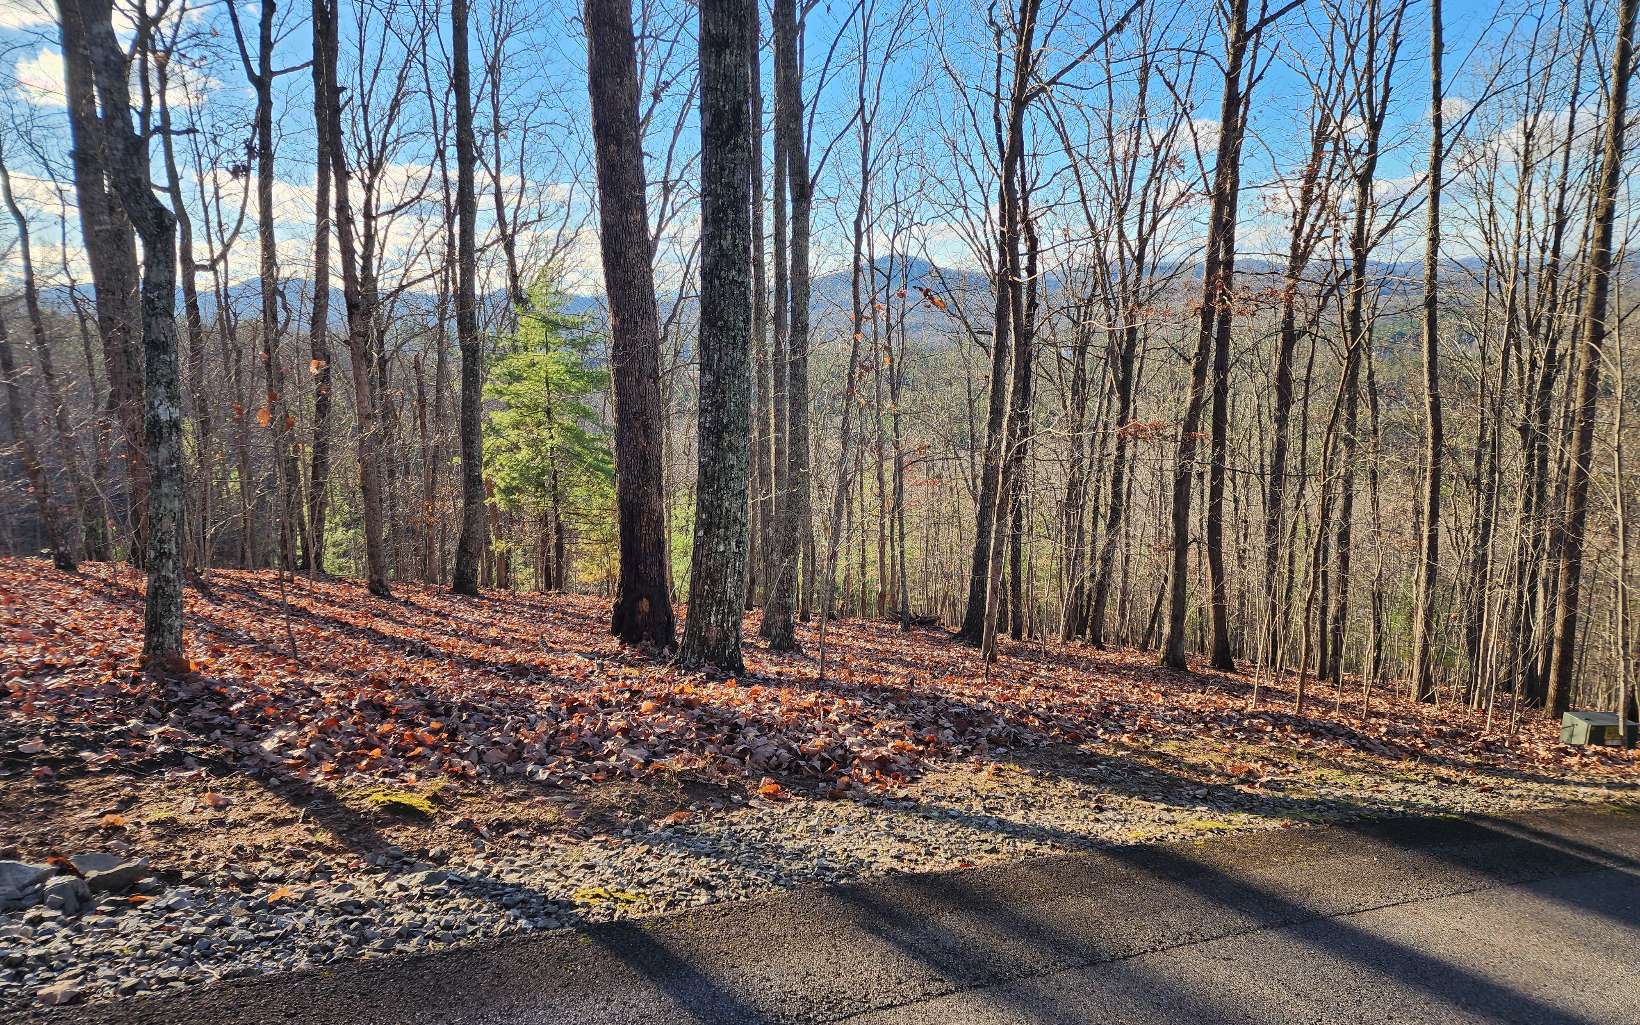 Beautiful Long Range Mountain view lot in Deer Creek Estates, Underground utilities, and County water. The lot elevation is approximately 2200 ft with a West facing view, providing some very nice sunset views of the North Georgia Mountains. All paved roads, close to town and beautiful Lake Nottely. 1.3 acres in a quiet, friendly community, nearby public boat ramps, and a marina. Convenient to Blue Ridge, Blairsville, and Murphy NC.